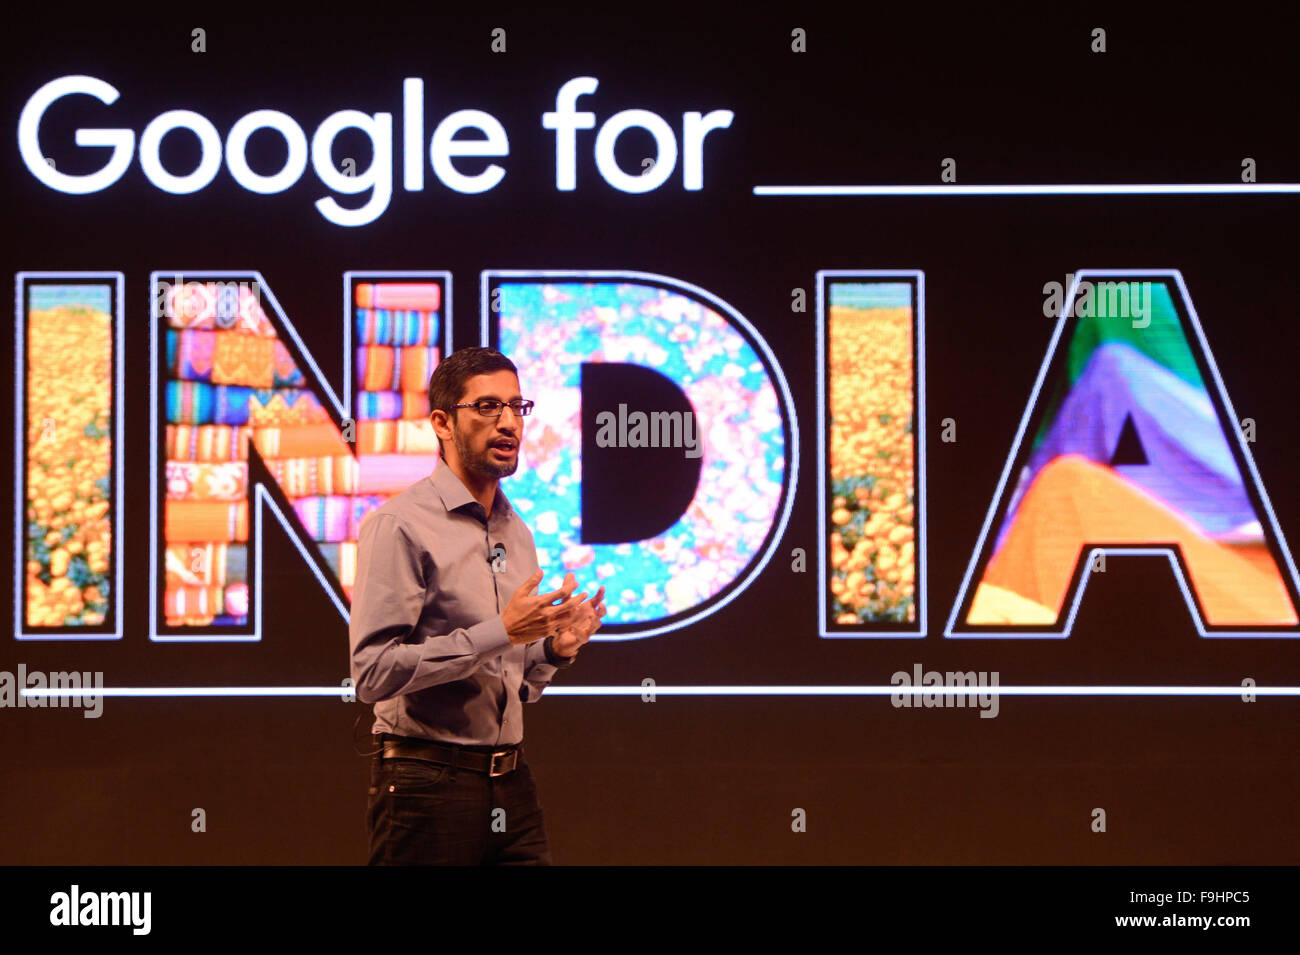 New Delhi, India. 16th Dec, 2015. Chief Executive Officer of Google Inc. Sundar Pichai speaks at a news conference in New Delhi, India, Dec. 16, 2015. Sundar Pichai on Wednesday announced the company's plans to expand products and services in India. © Stringer/Xinhua/Alamy Live News Stock Photo